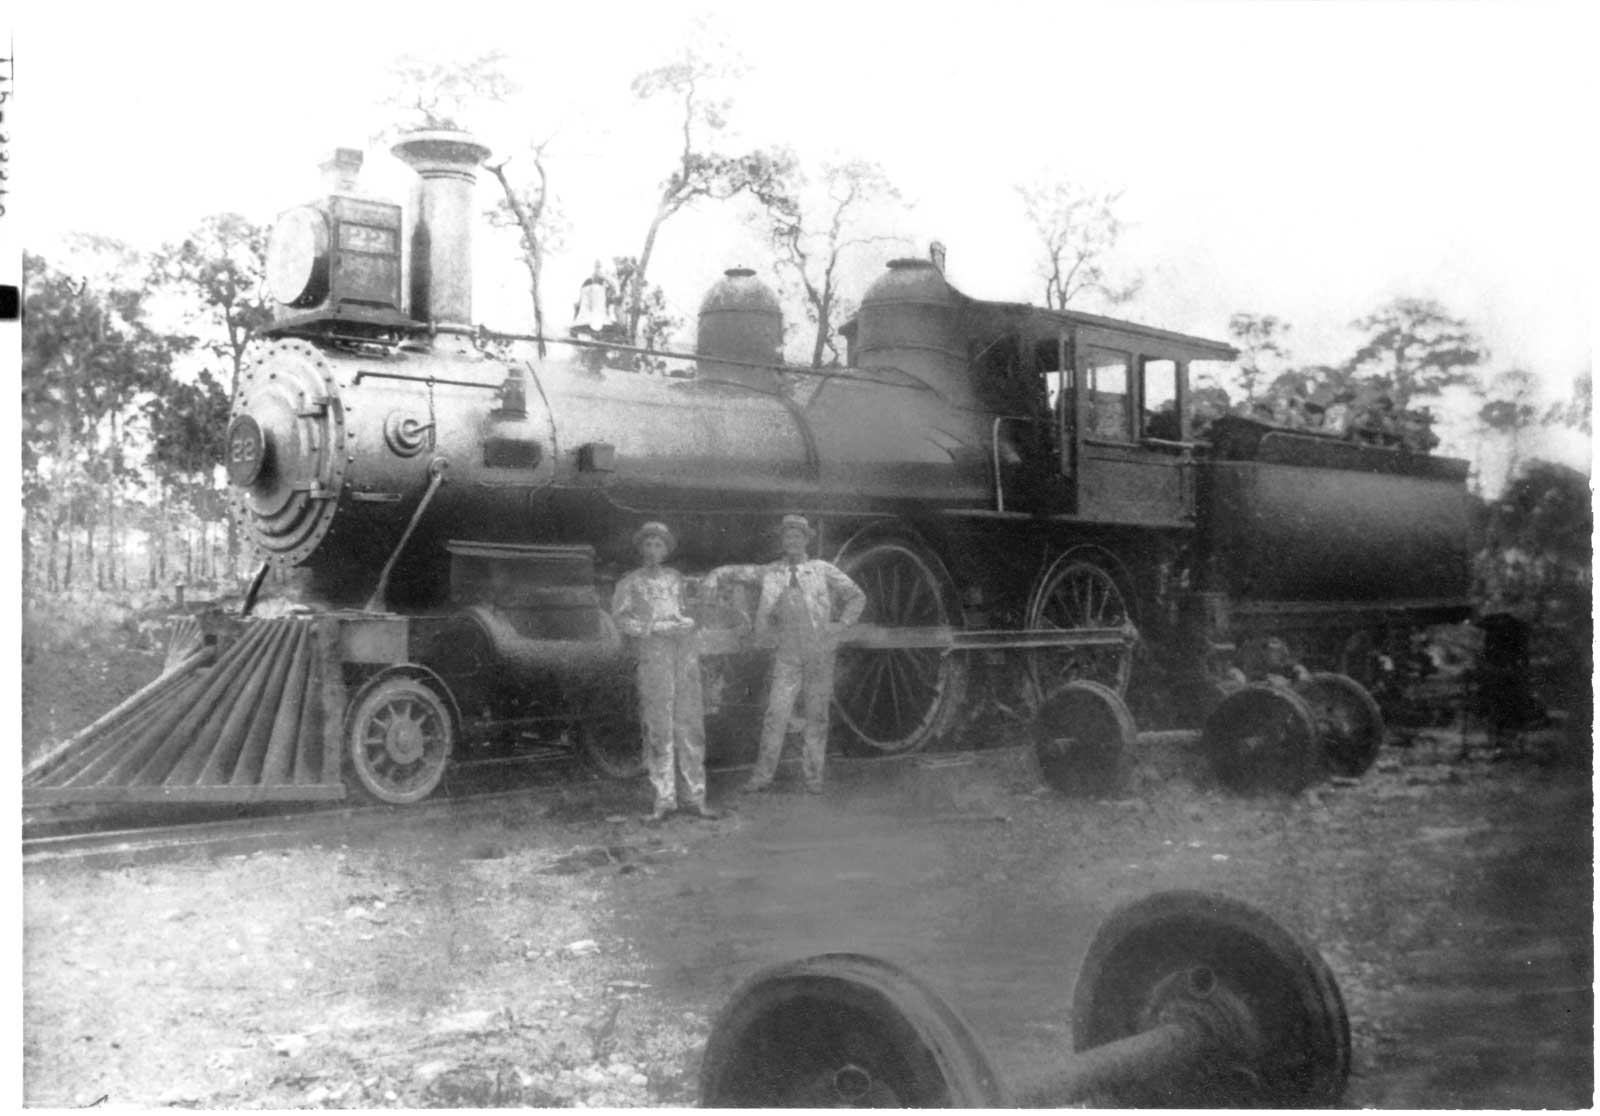 2 people standing in front of a train engine